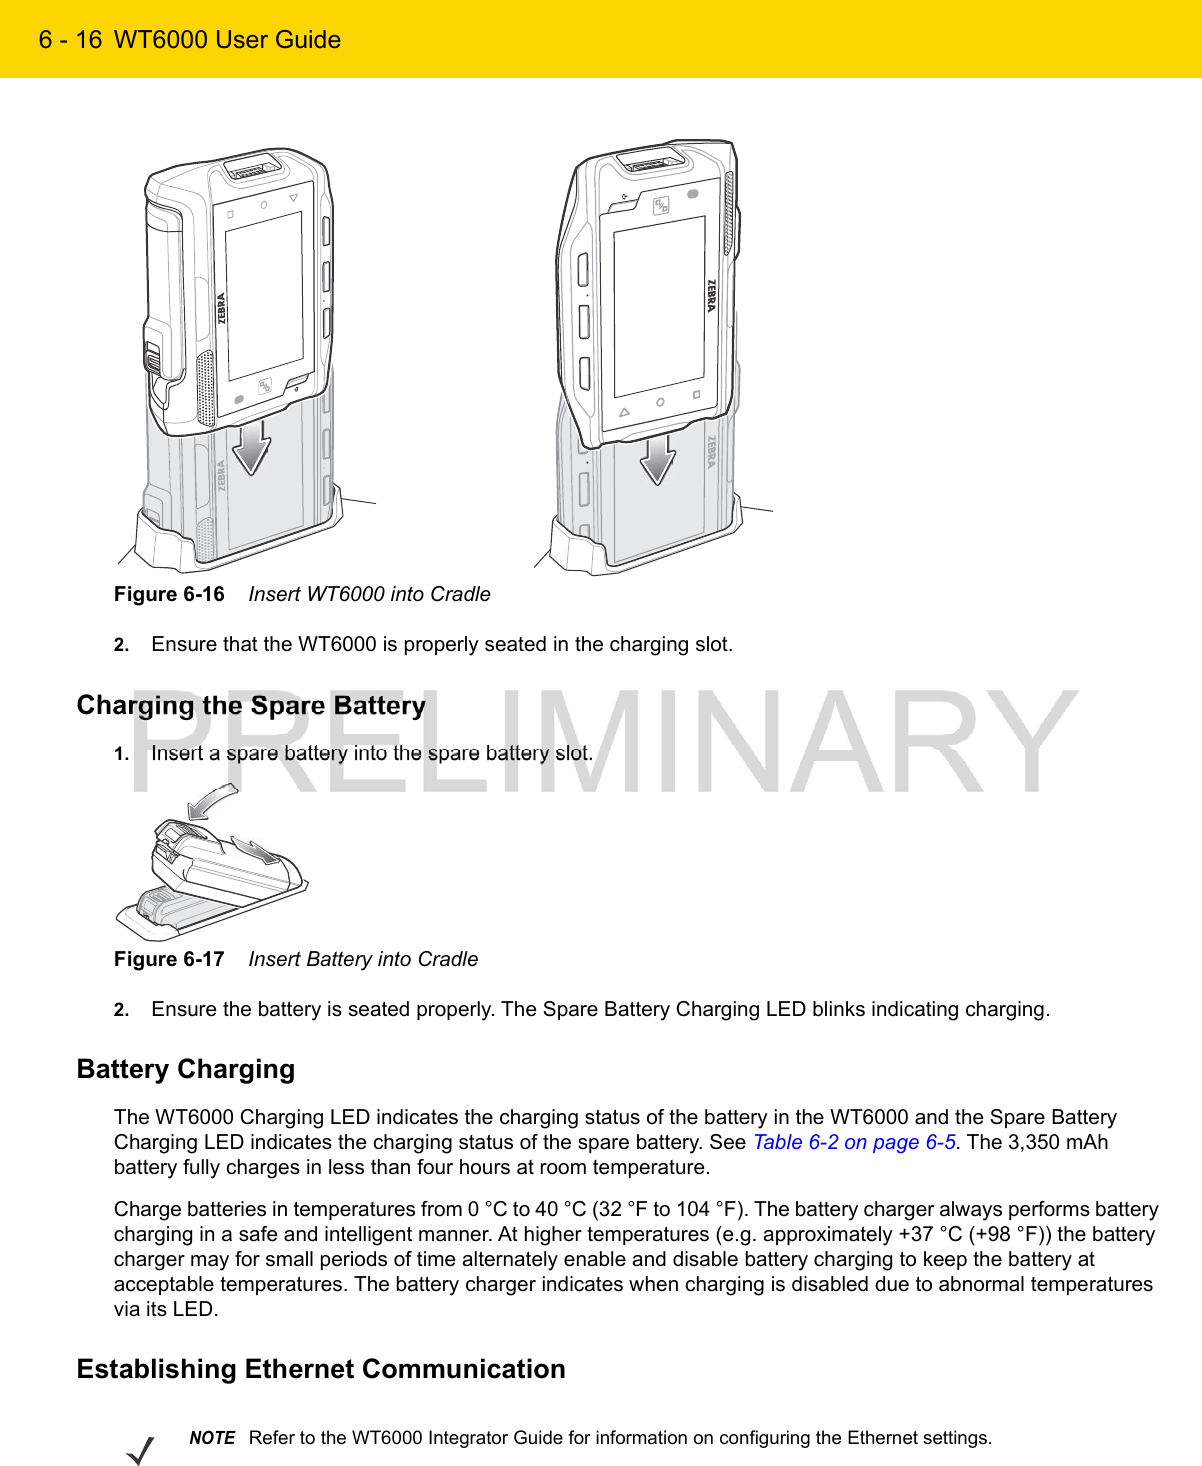 6 - 16 WT6000 User GuideFigure 6-16    Insert WT6000 into Cradle2. Ensure that the WT6000 is properly seated in the charging slot.Charging the Spare Battery1. Insert a spare battery into the spare battery slot.Figure 6-17    Insert Battery into Cradle2. Ensure the battery is seated properly. The Spare Battery Charging LED blinks indicating charging.Battery ChargingThe WT6000 Charging LED indicates the charging status of the battery in the WT6000 and the Spare Battery Charging LED indicates the charging status of the spare battery. See Table 6-2 on page 6-5. The 3,350 mAh battery fully charges in less than four hours at room temperature.Charge batteries in temperatures from 0 °C to 40 °C (32 °F to 104 °F). The battery charger always performs battery charging in a safe and intelligent manner. At higher temperatures (e.g. approximately +37 °C (+98 °F)) the battery charger may for small periods of time alternately enable and disable battery charging to keep the battery at acceptable temperatures. The battery charger indicates when charging is disabled due to abnormal temperatures via its LED.Establishing Ethernet CommunicationNOTERefer to the WT6000 Integrator Guide for information on configuring the Ethernet settings.